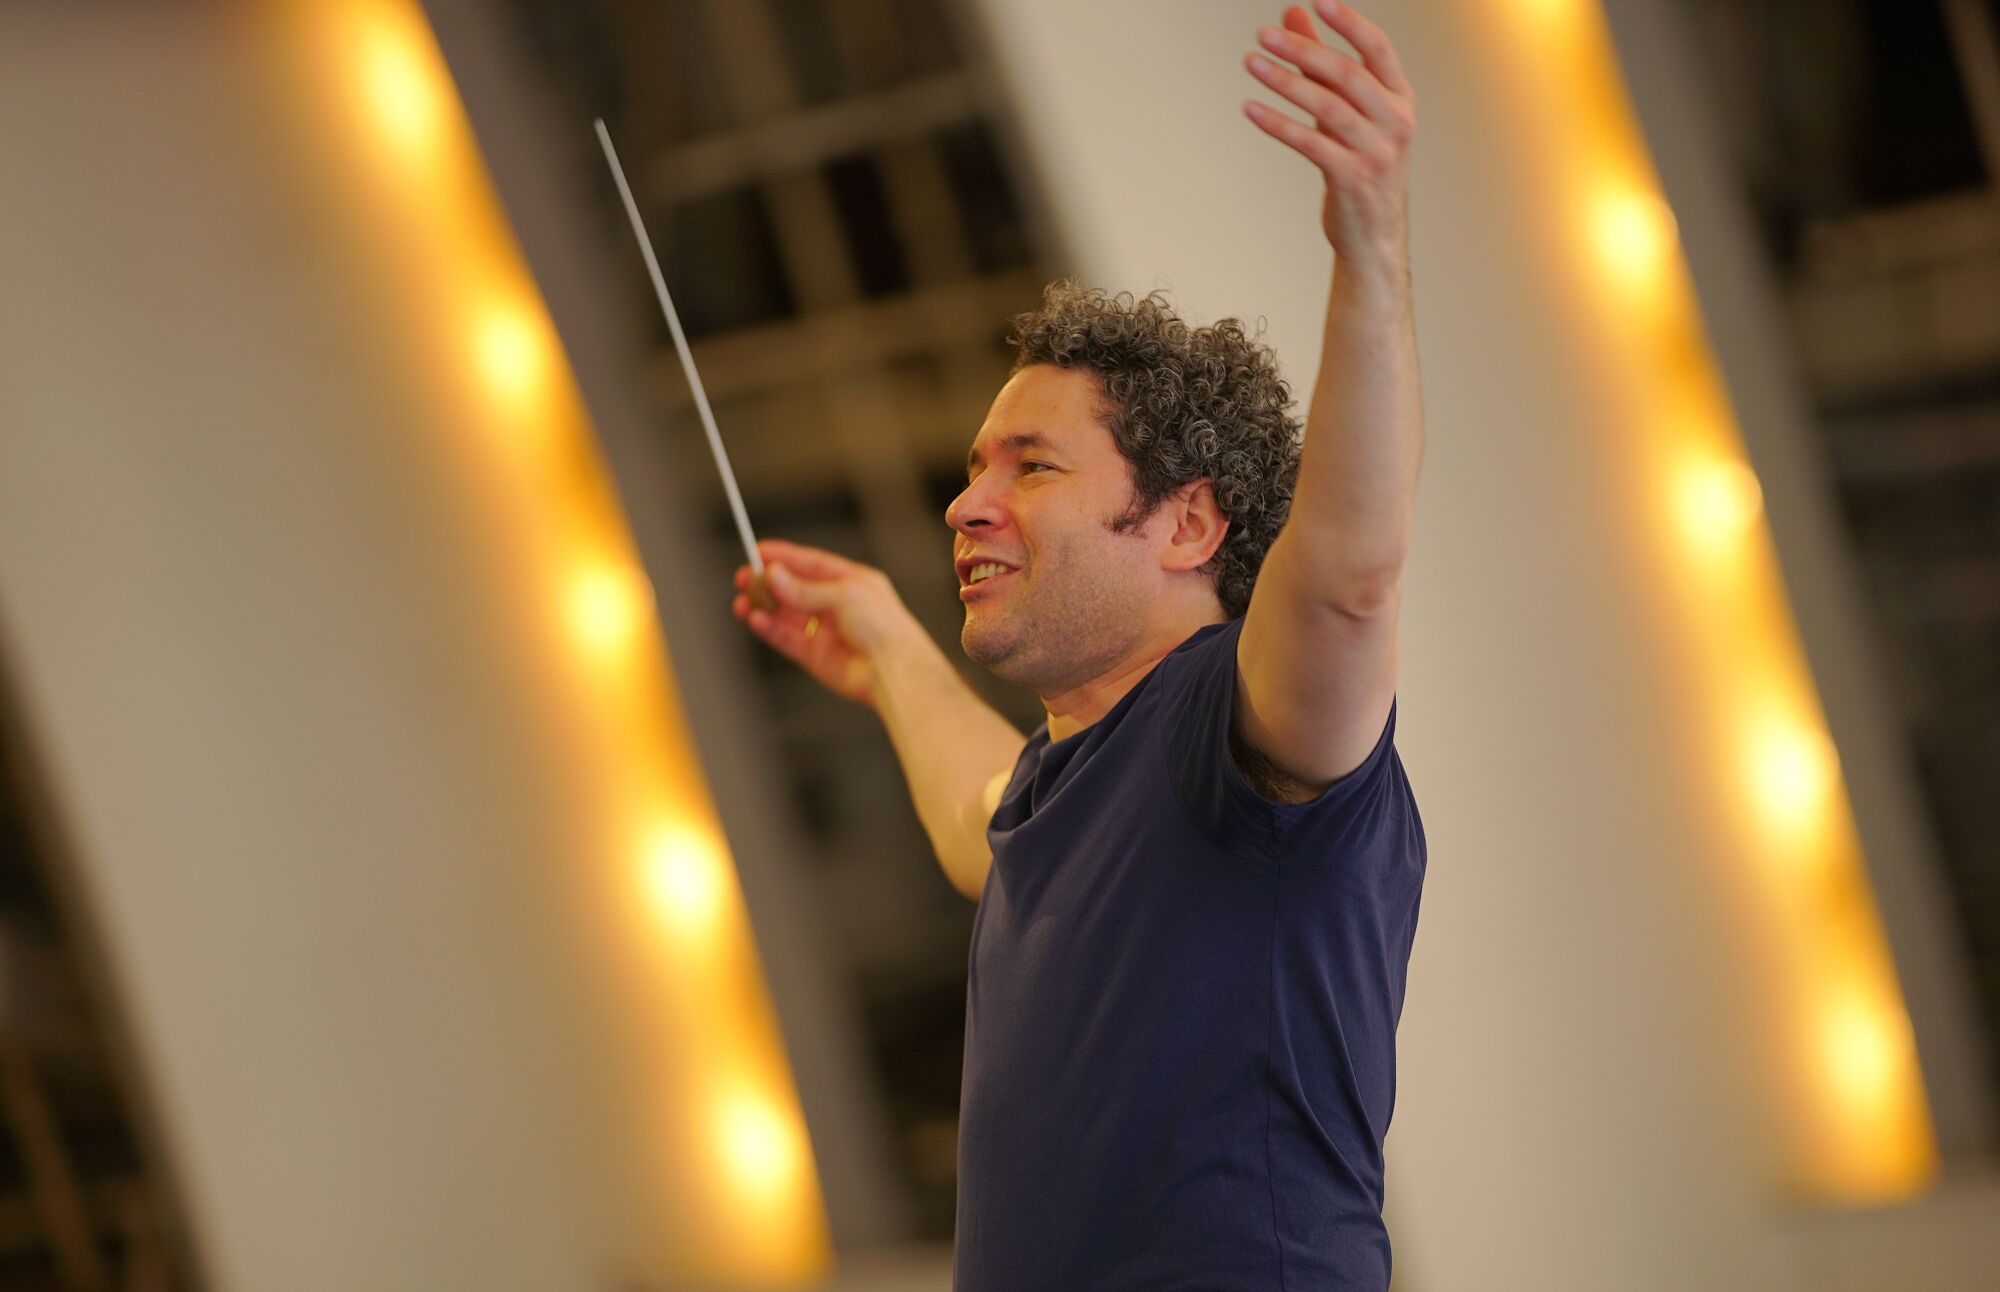 Dudamel, looking exultant, raises his arms with baton in hand